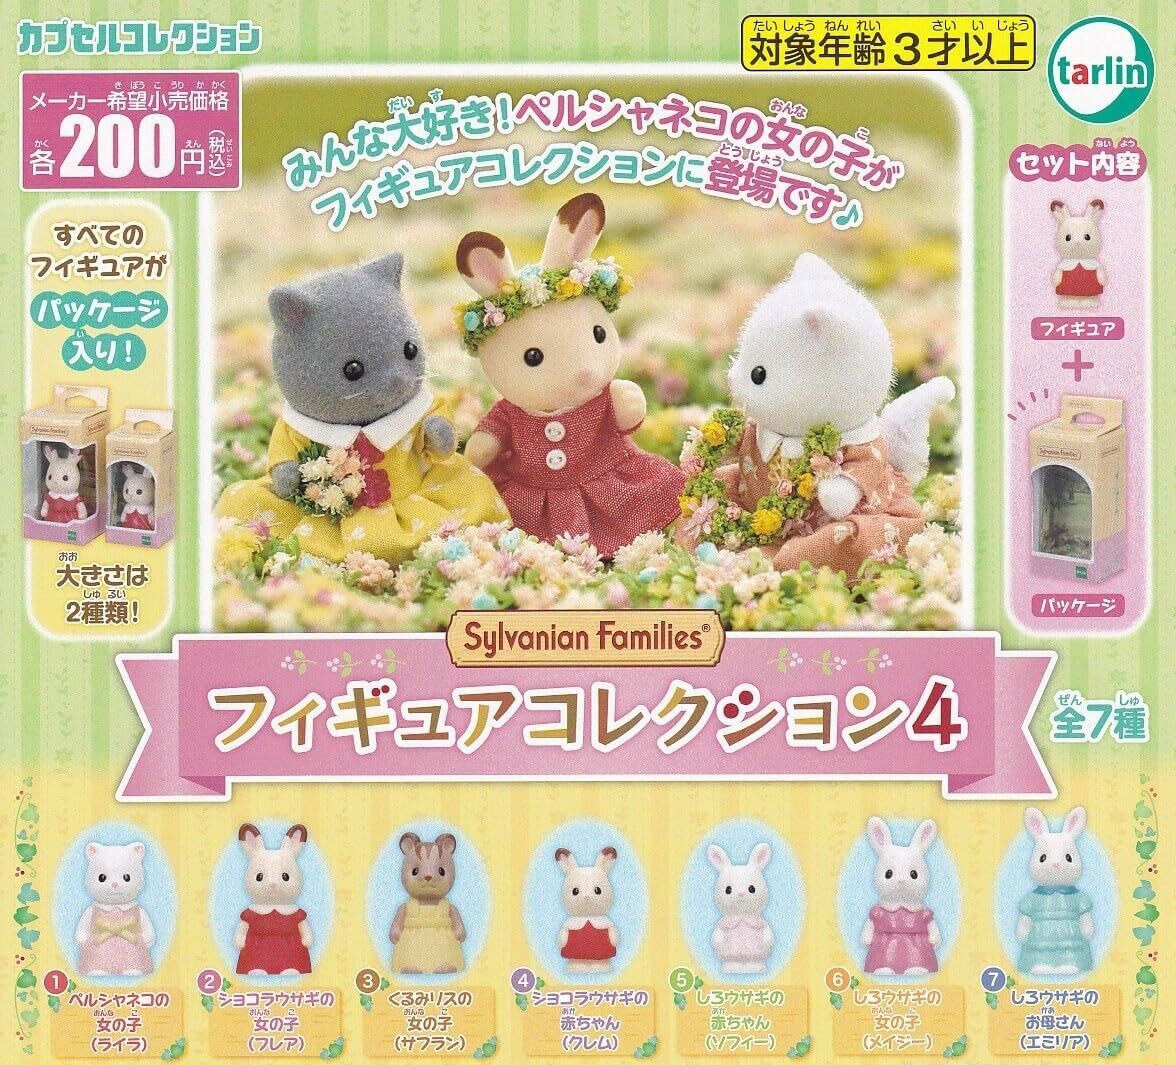 Sylvanian Families Mini Figure Collection Total 7 types Complete Set Capsule Toy